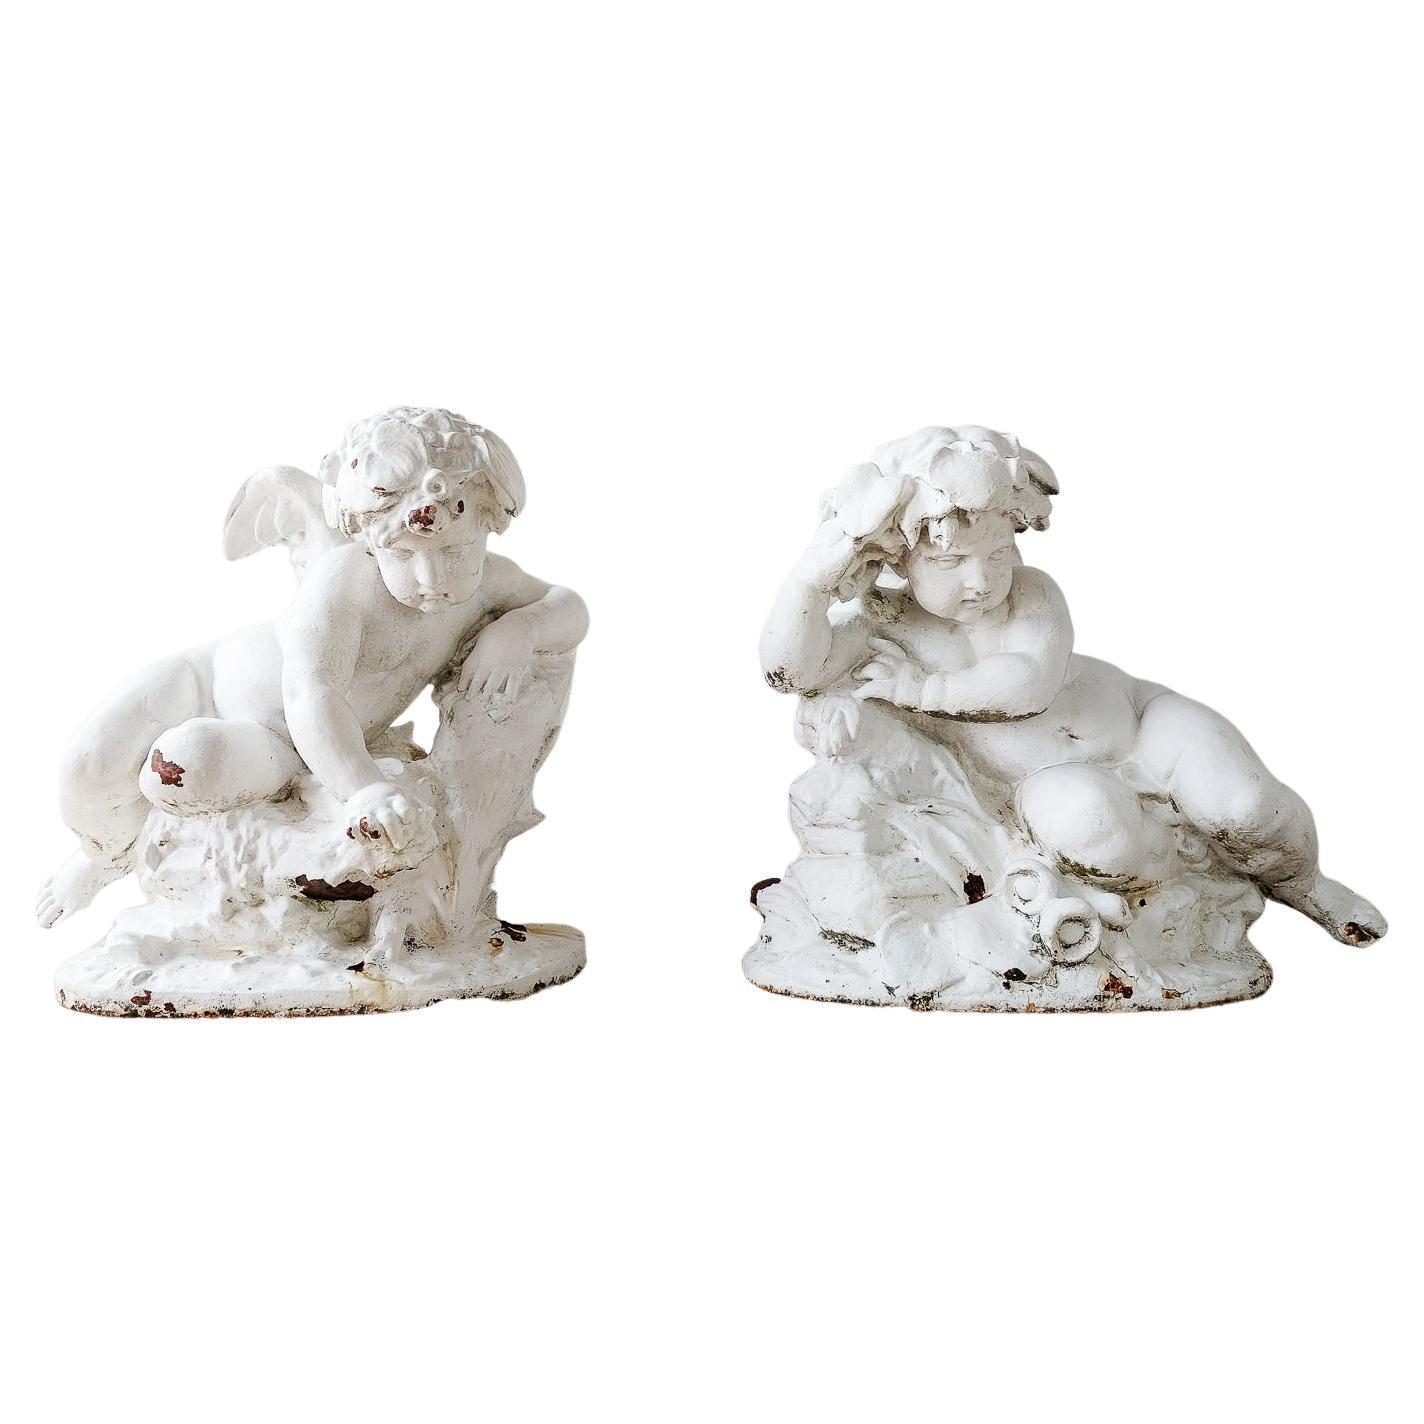 An impressive pair of monumental sized cast iron putti. These super large sculptures are made in the manner of the 18th century. The cast iron has it's original white patina, which shows wear with their age. The putti are in a reclining position,